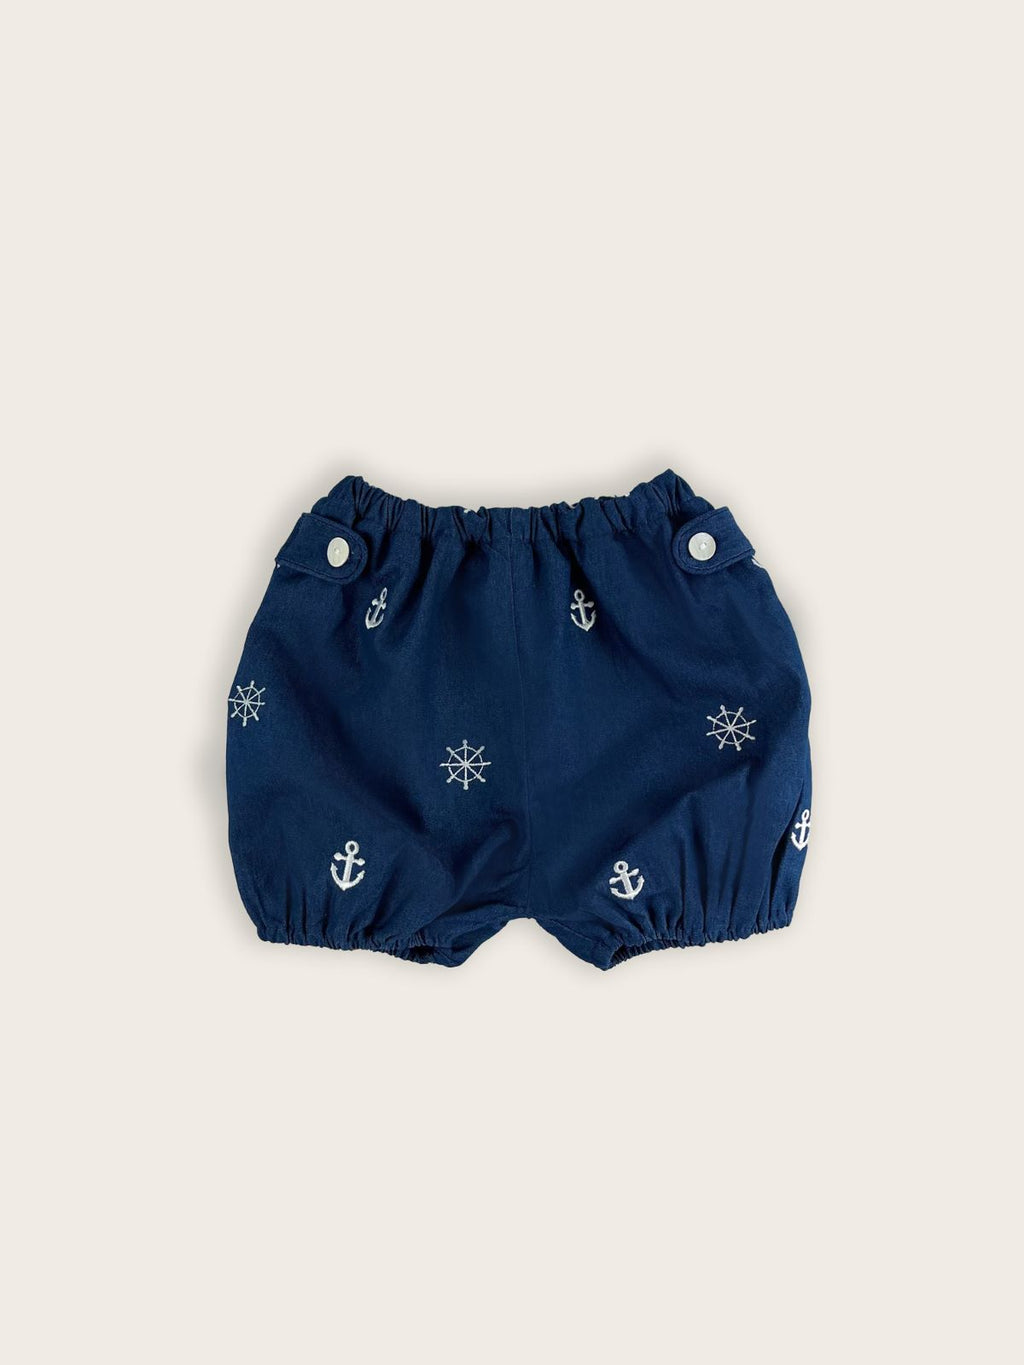 Baby boy bloomer in a blue denim with white nautical anchors and ship's wheels